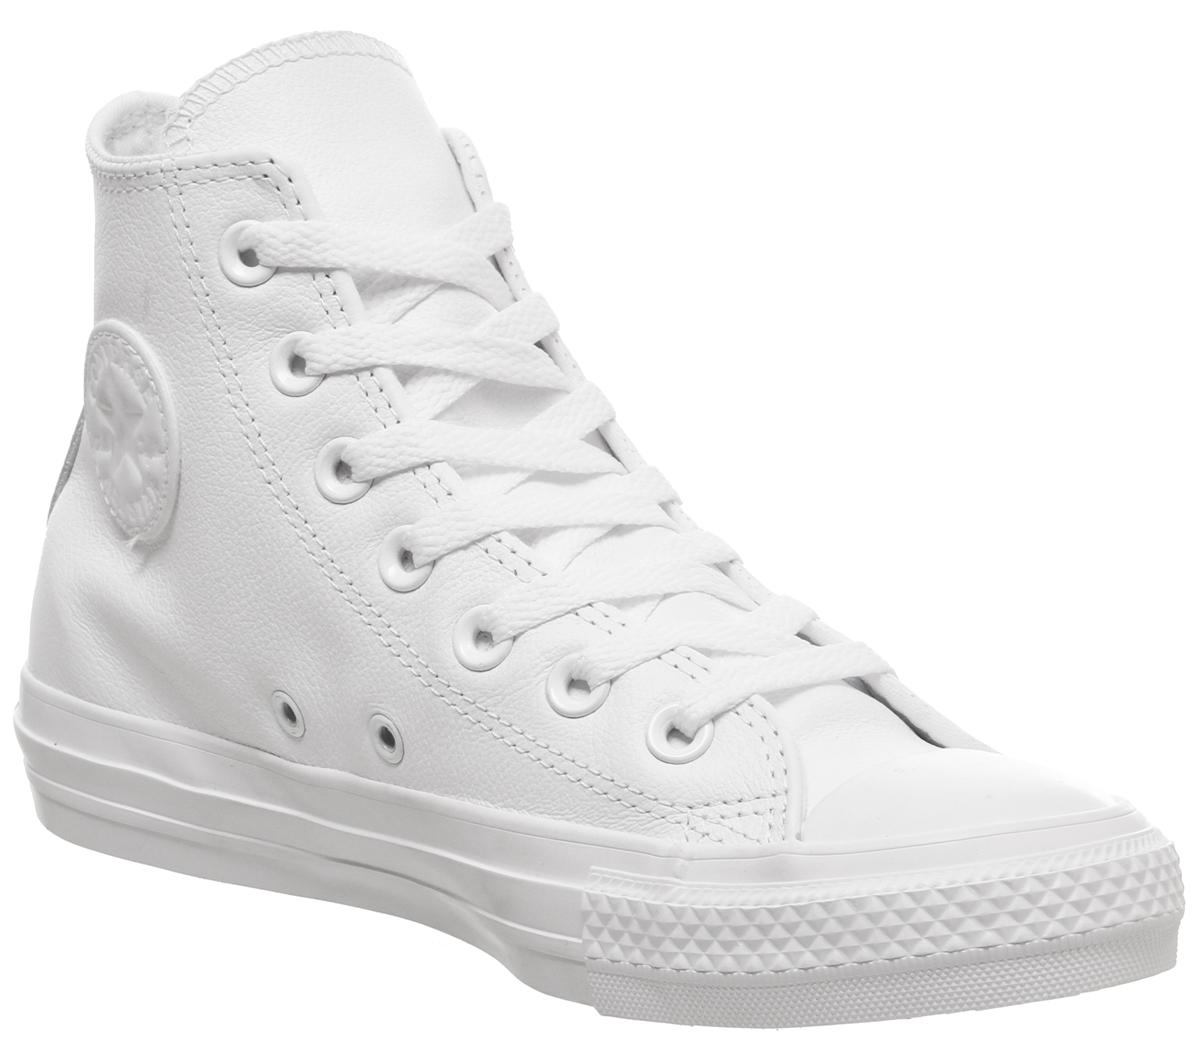 converse leather high tops,Boutique 